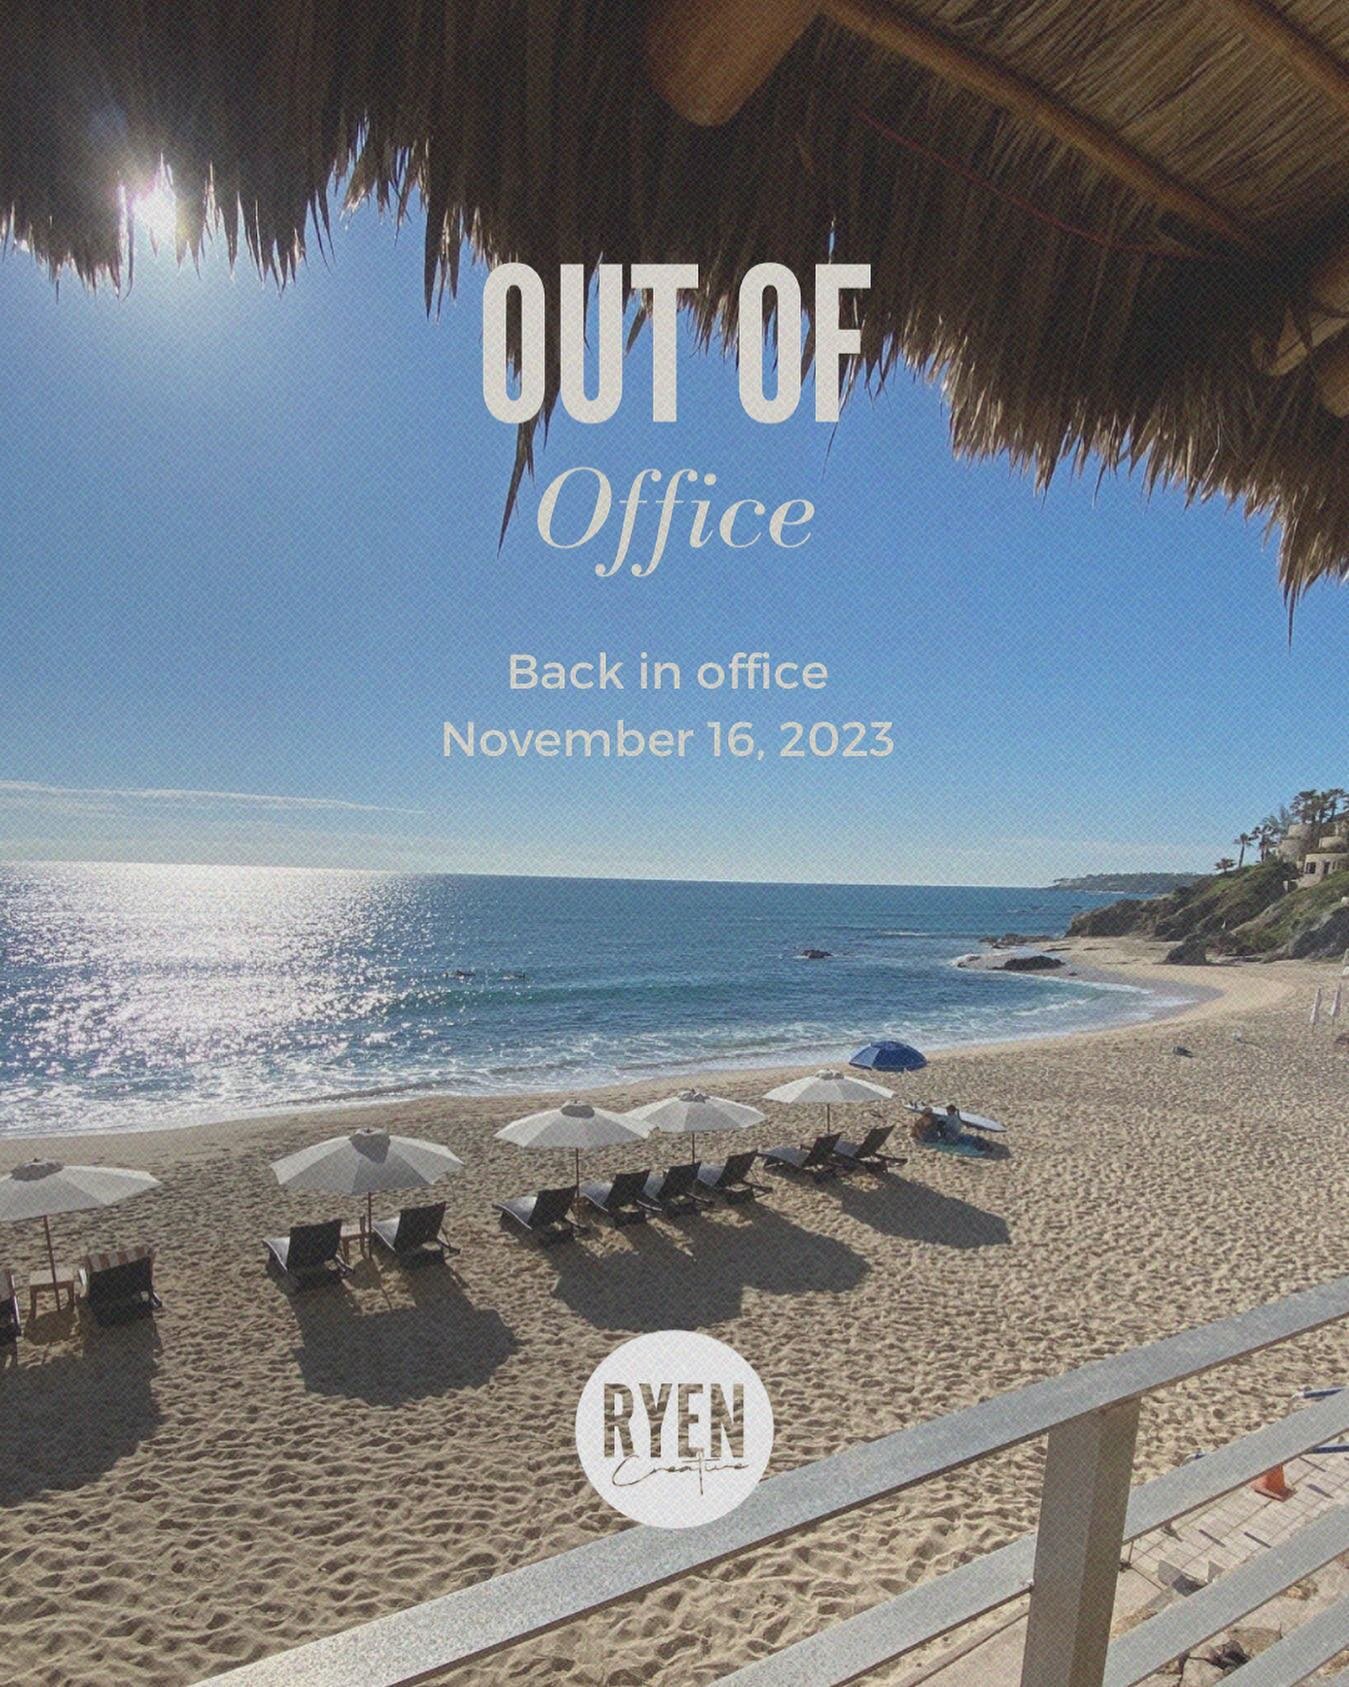 😎✌🏼Back in office November 16th. 

#outofoffice #ooo